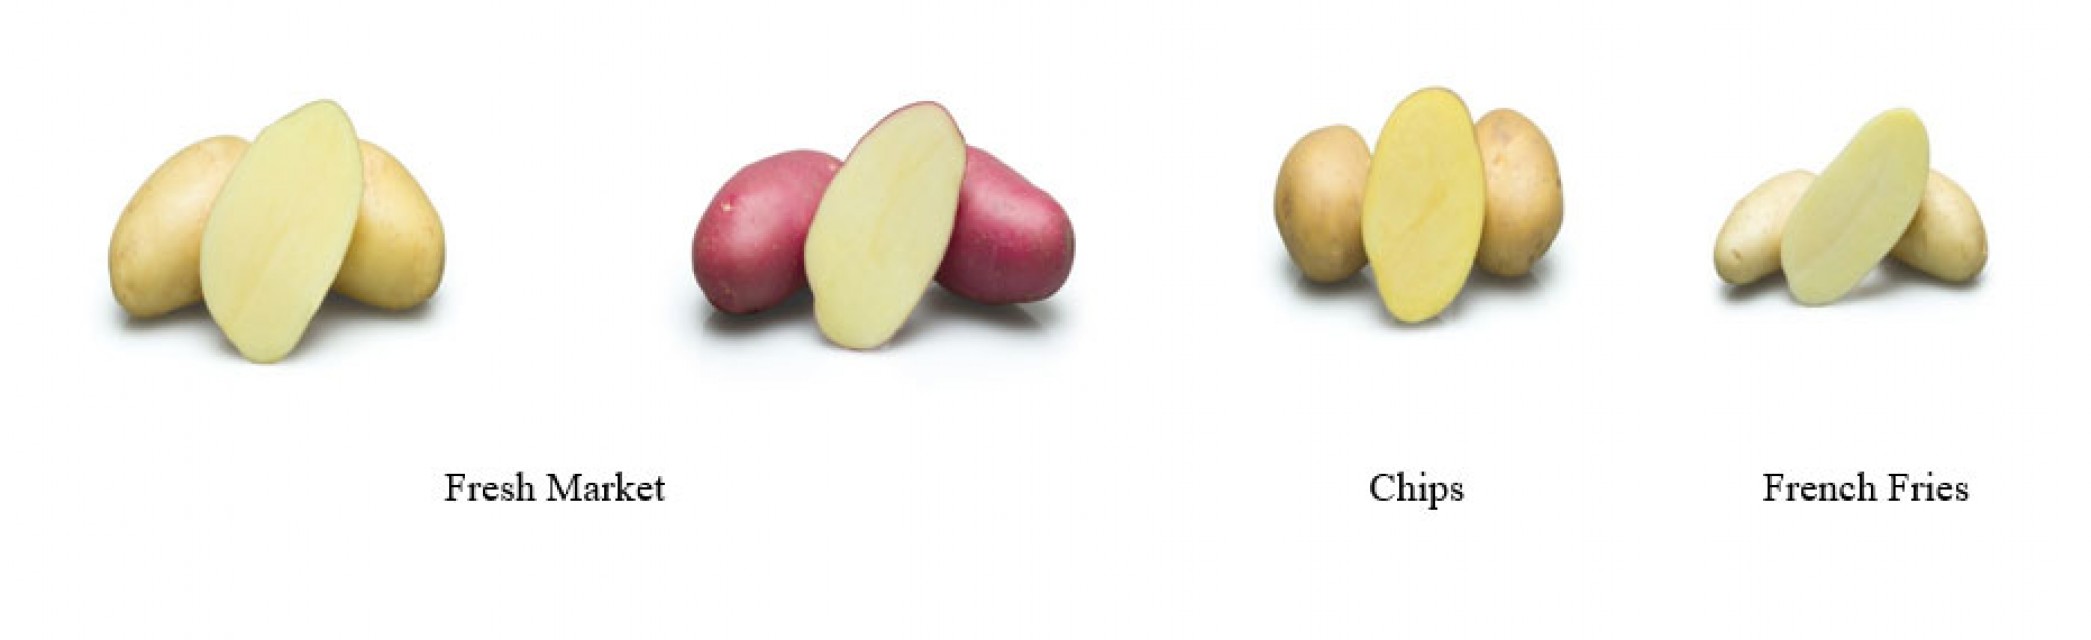 POTATO SEEDS by STET: Quality Seeds for Agriculture